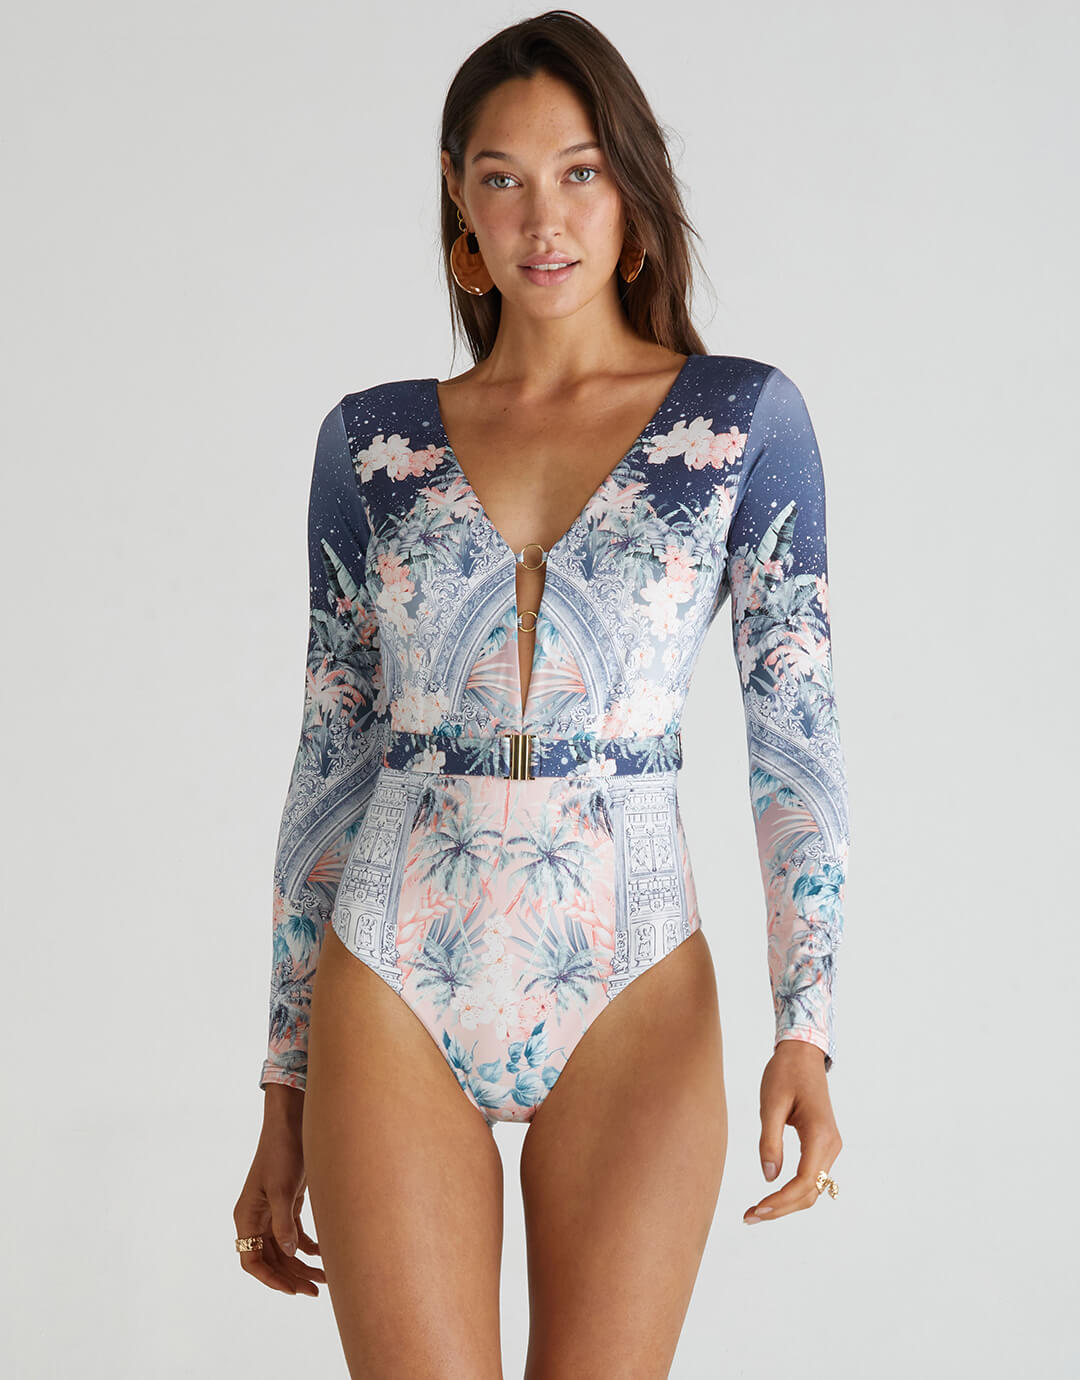 Indianic Alexandra One Piece Swimsuit -  Floral - Simply Beach UK